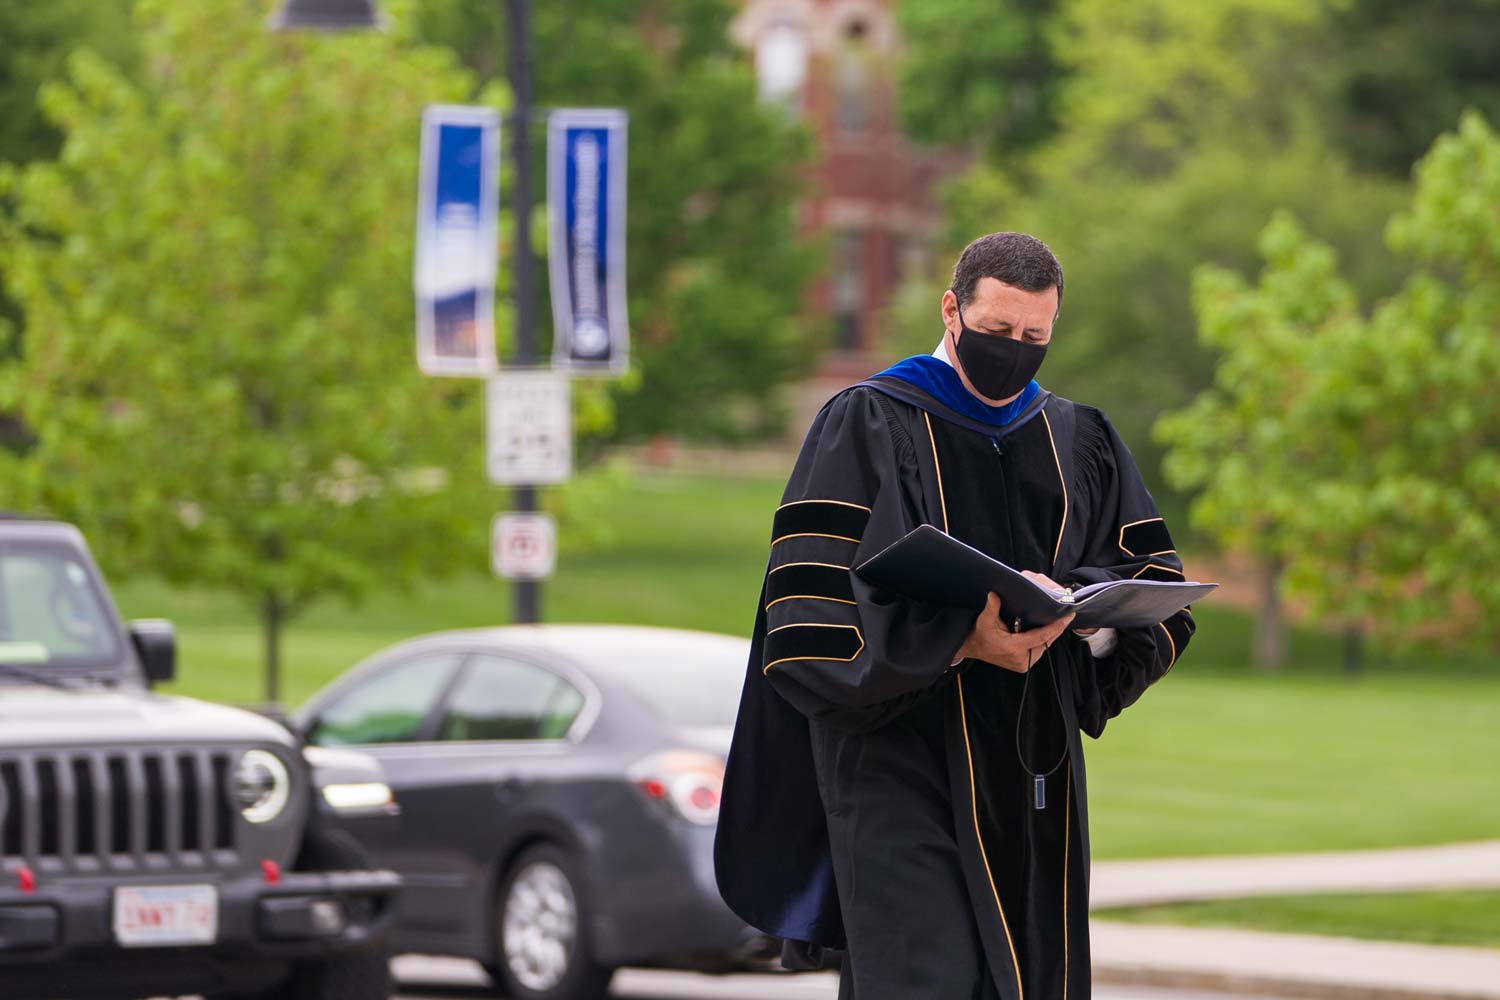 A professor in a gown and mask reading from a binder while walking on the sidewalk